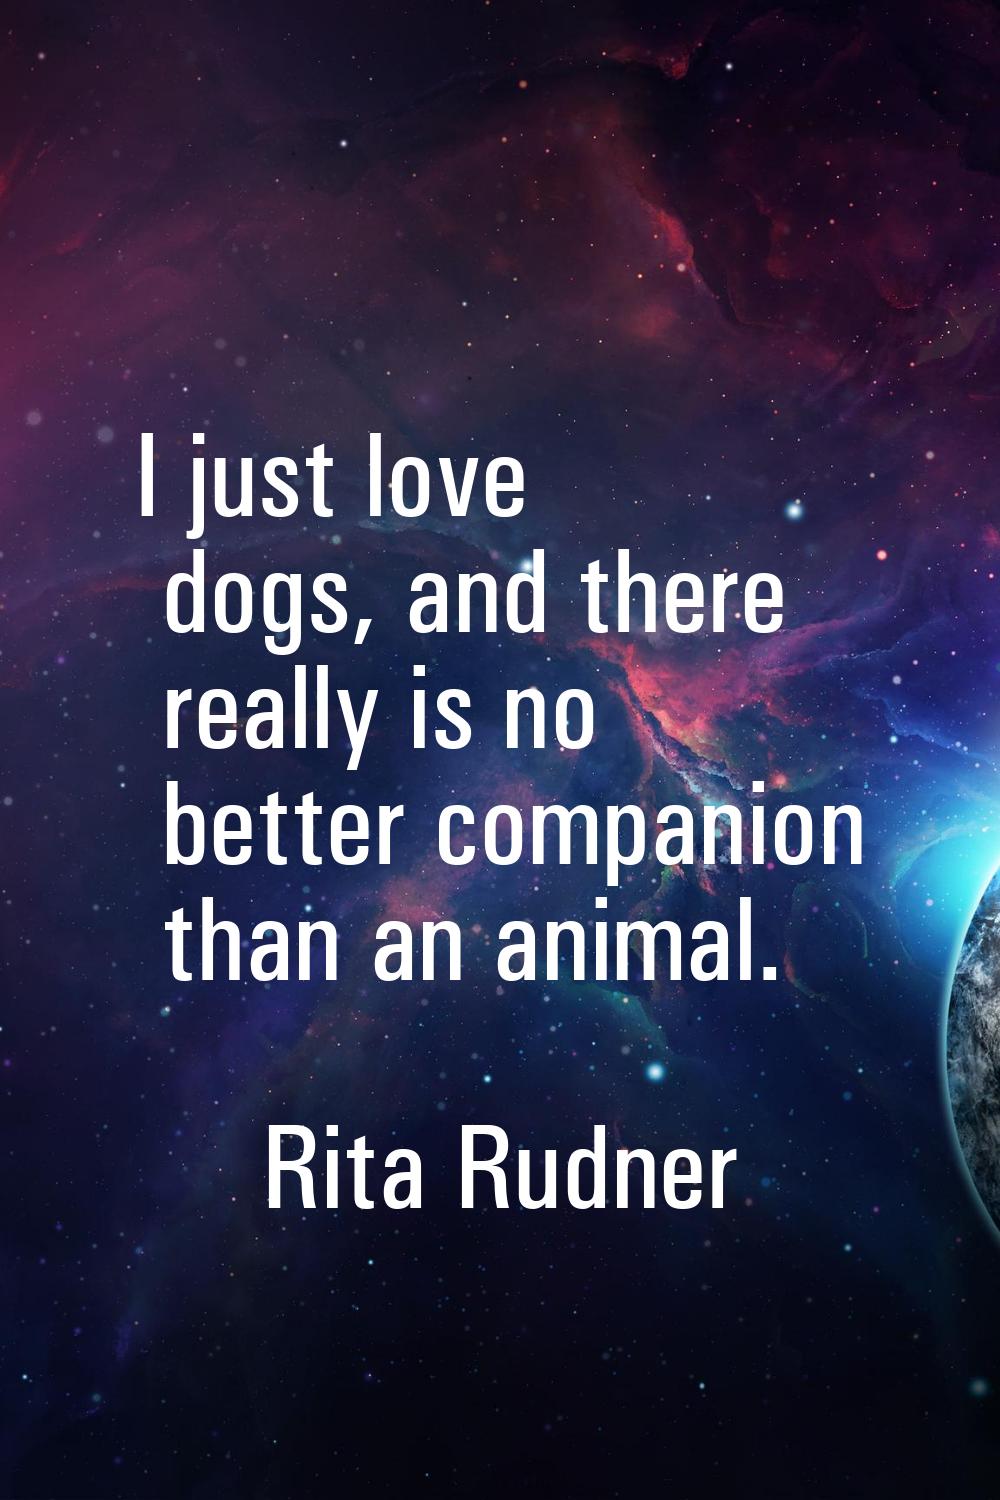 I just love dogs, and there really is no better companion than an animal.